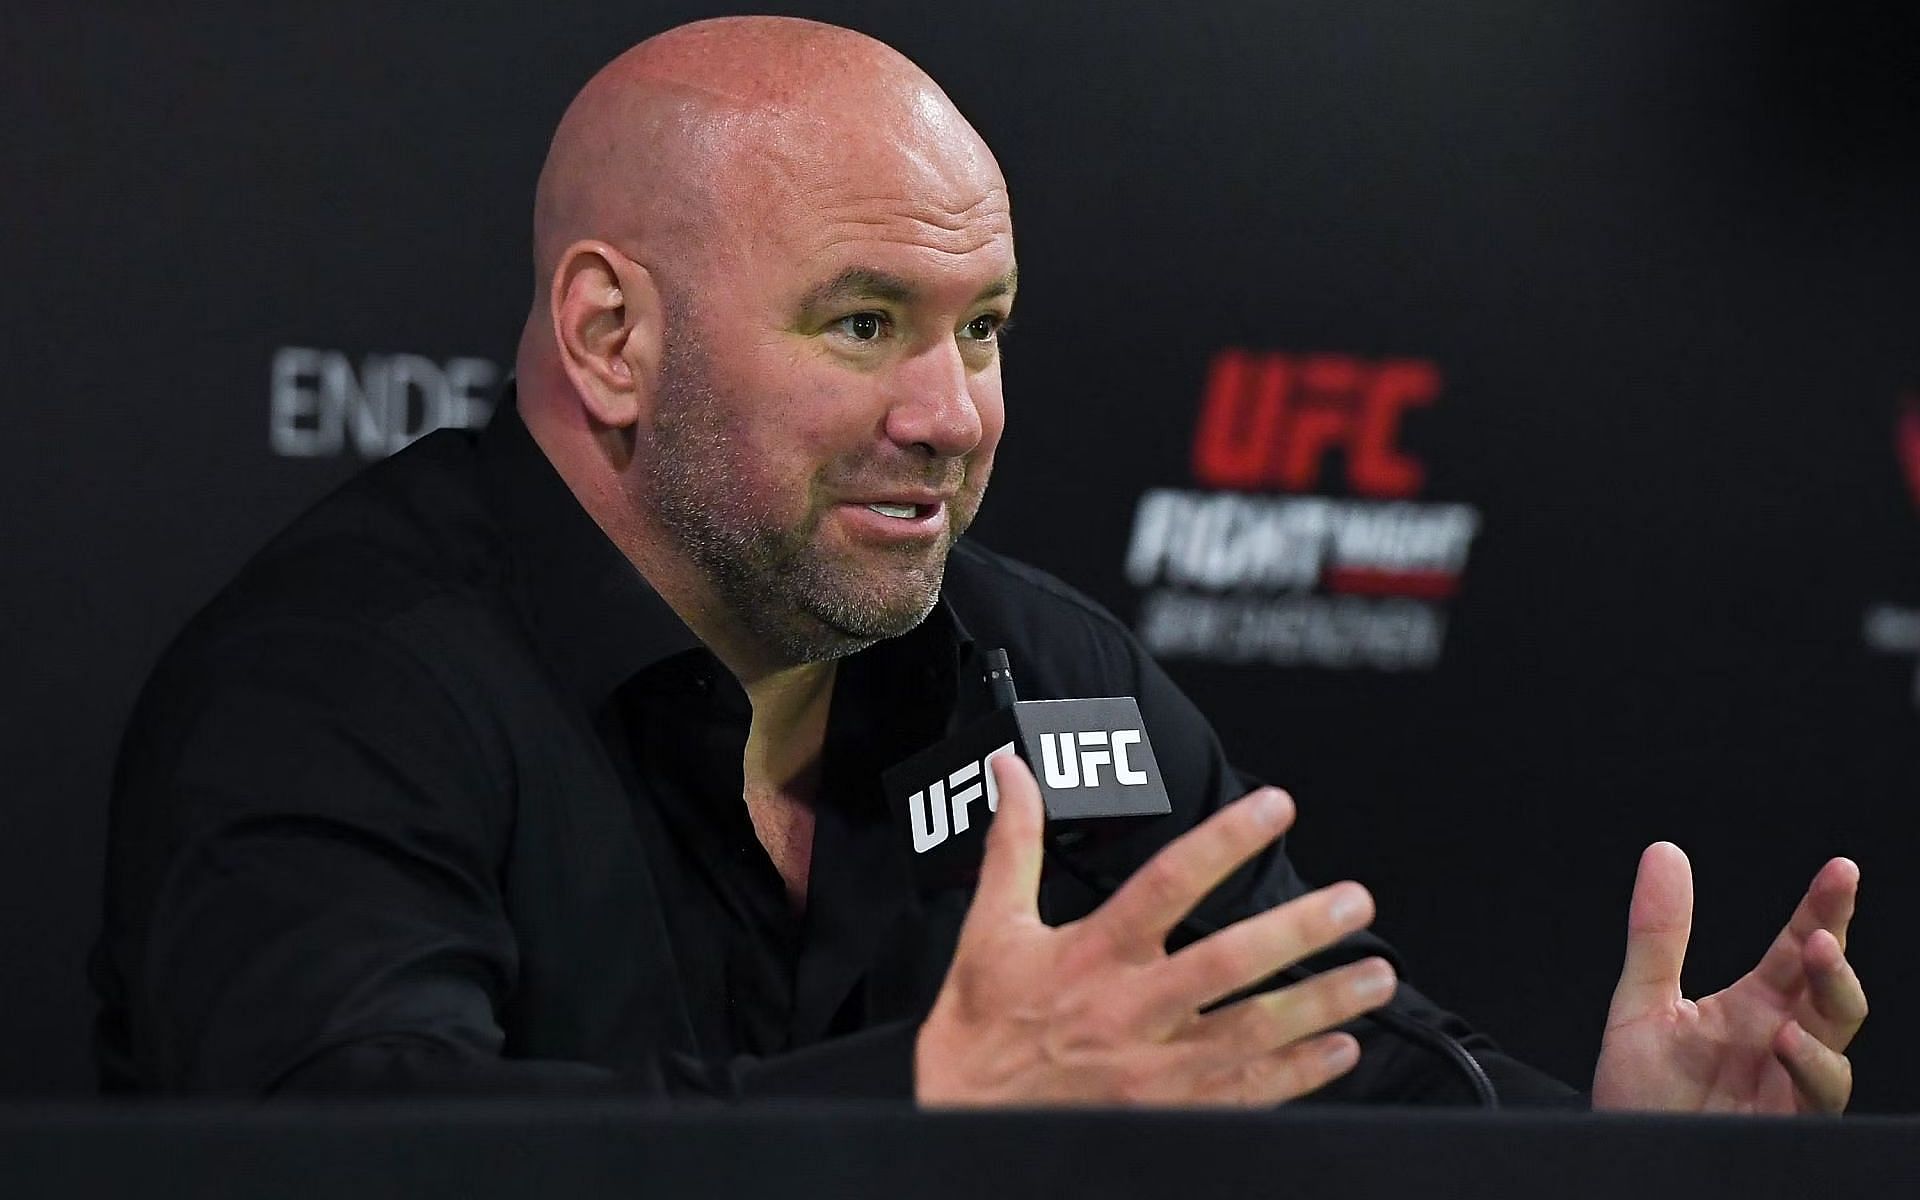 Plenty of rival promotions have tried to go up against Dana White, and many have failed